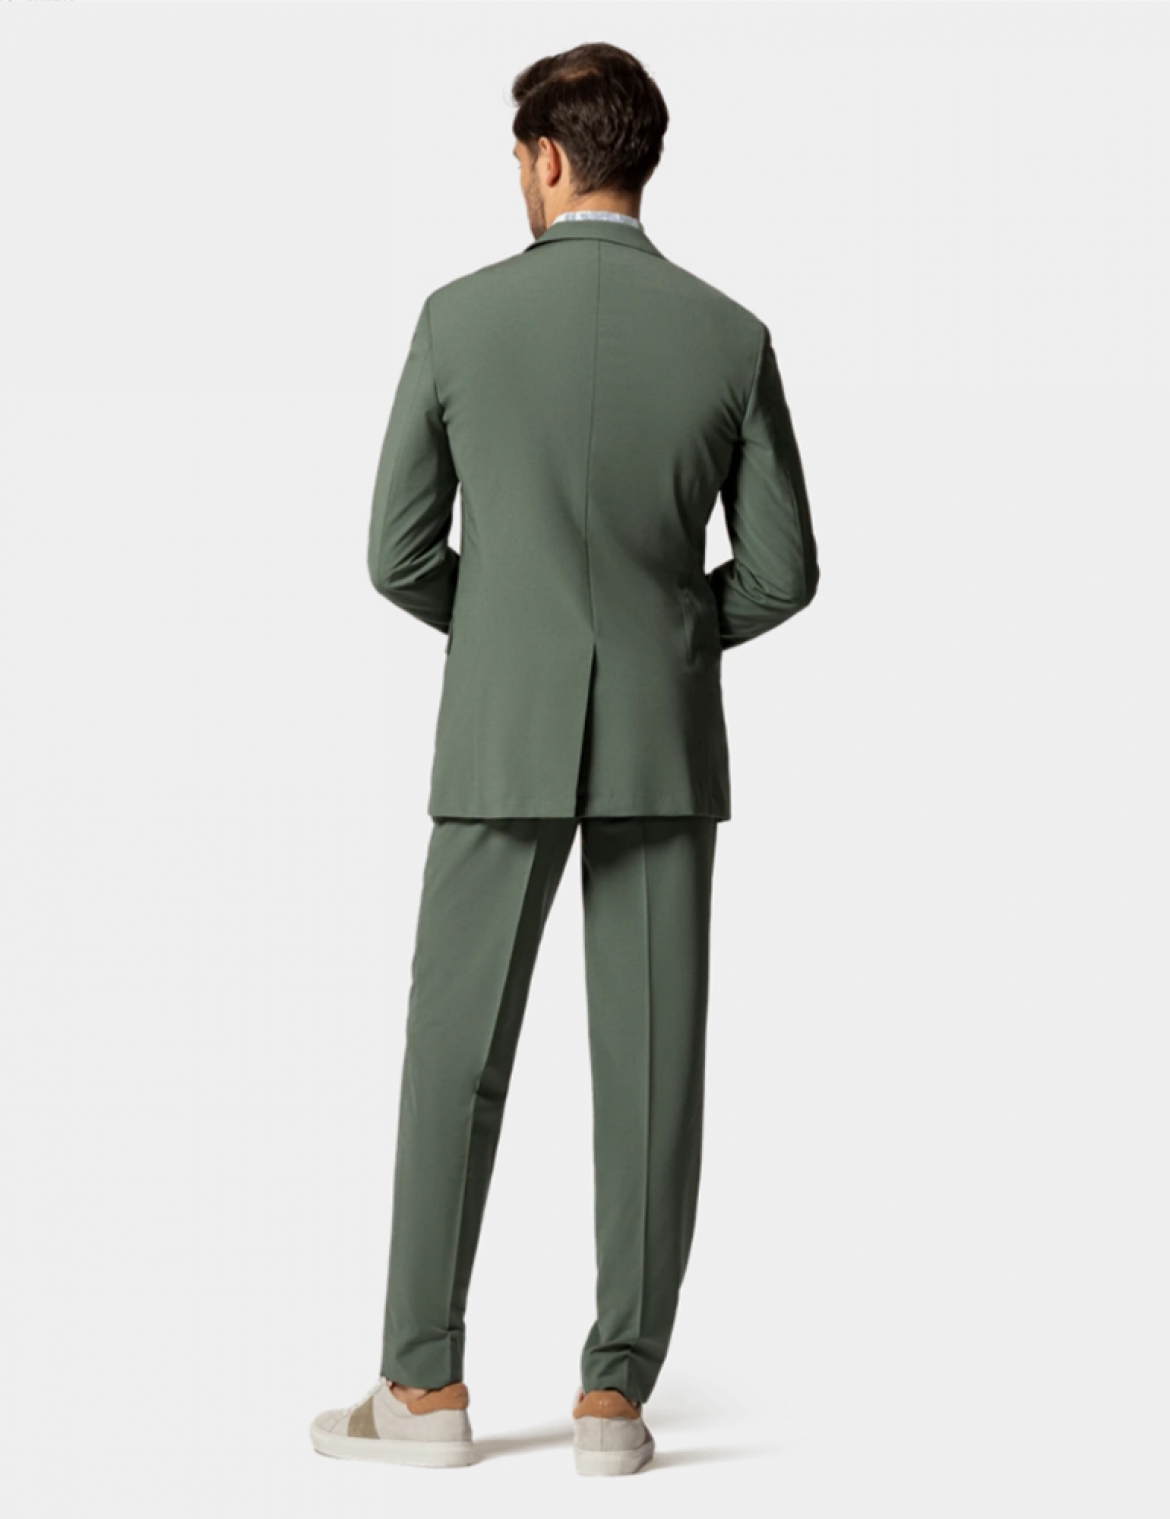 Mens Tailored Suits 